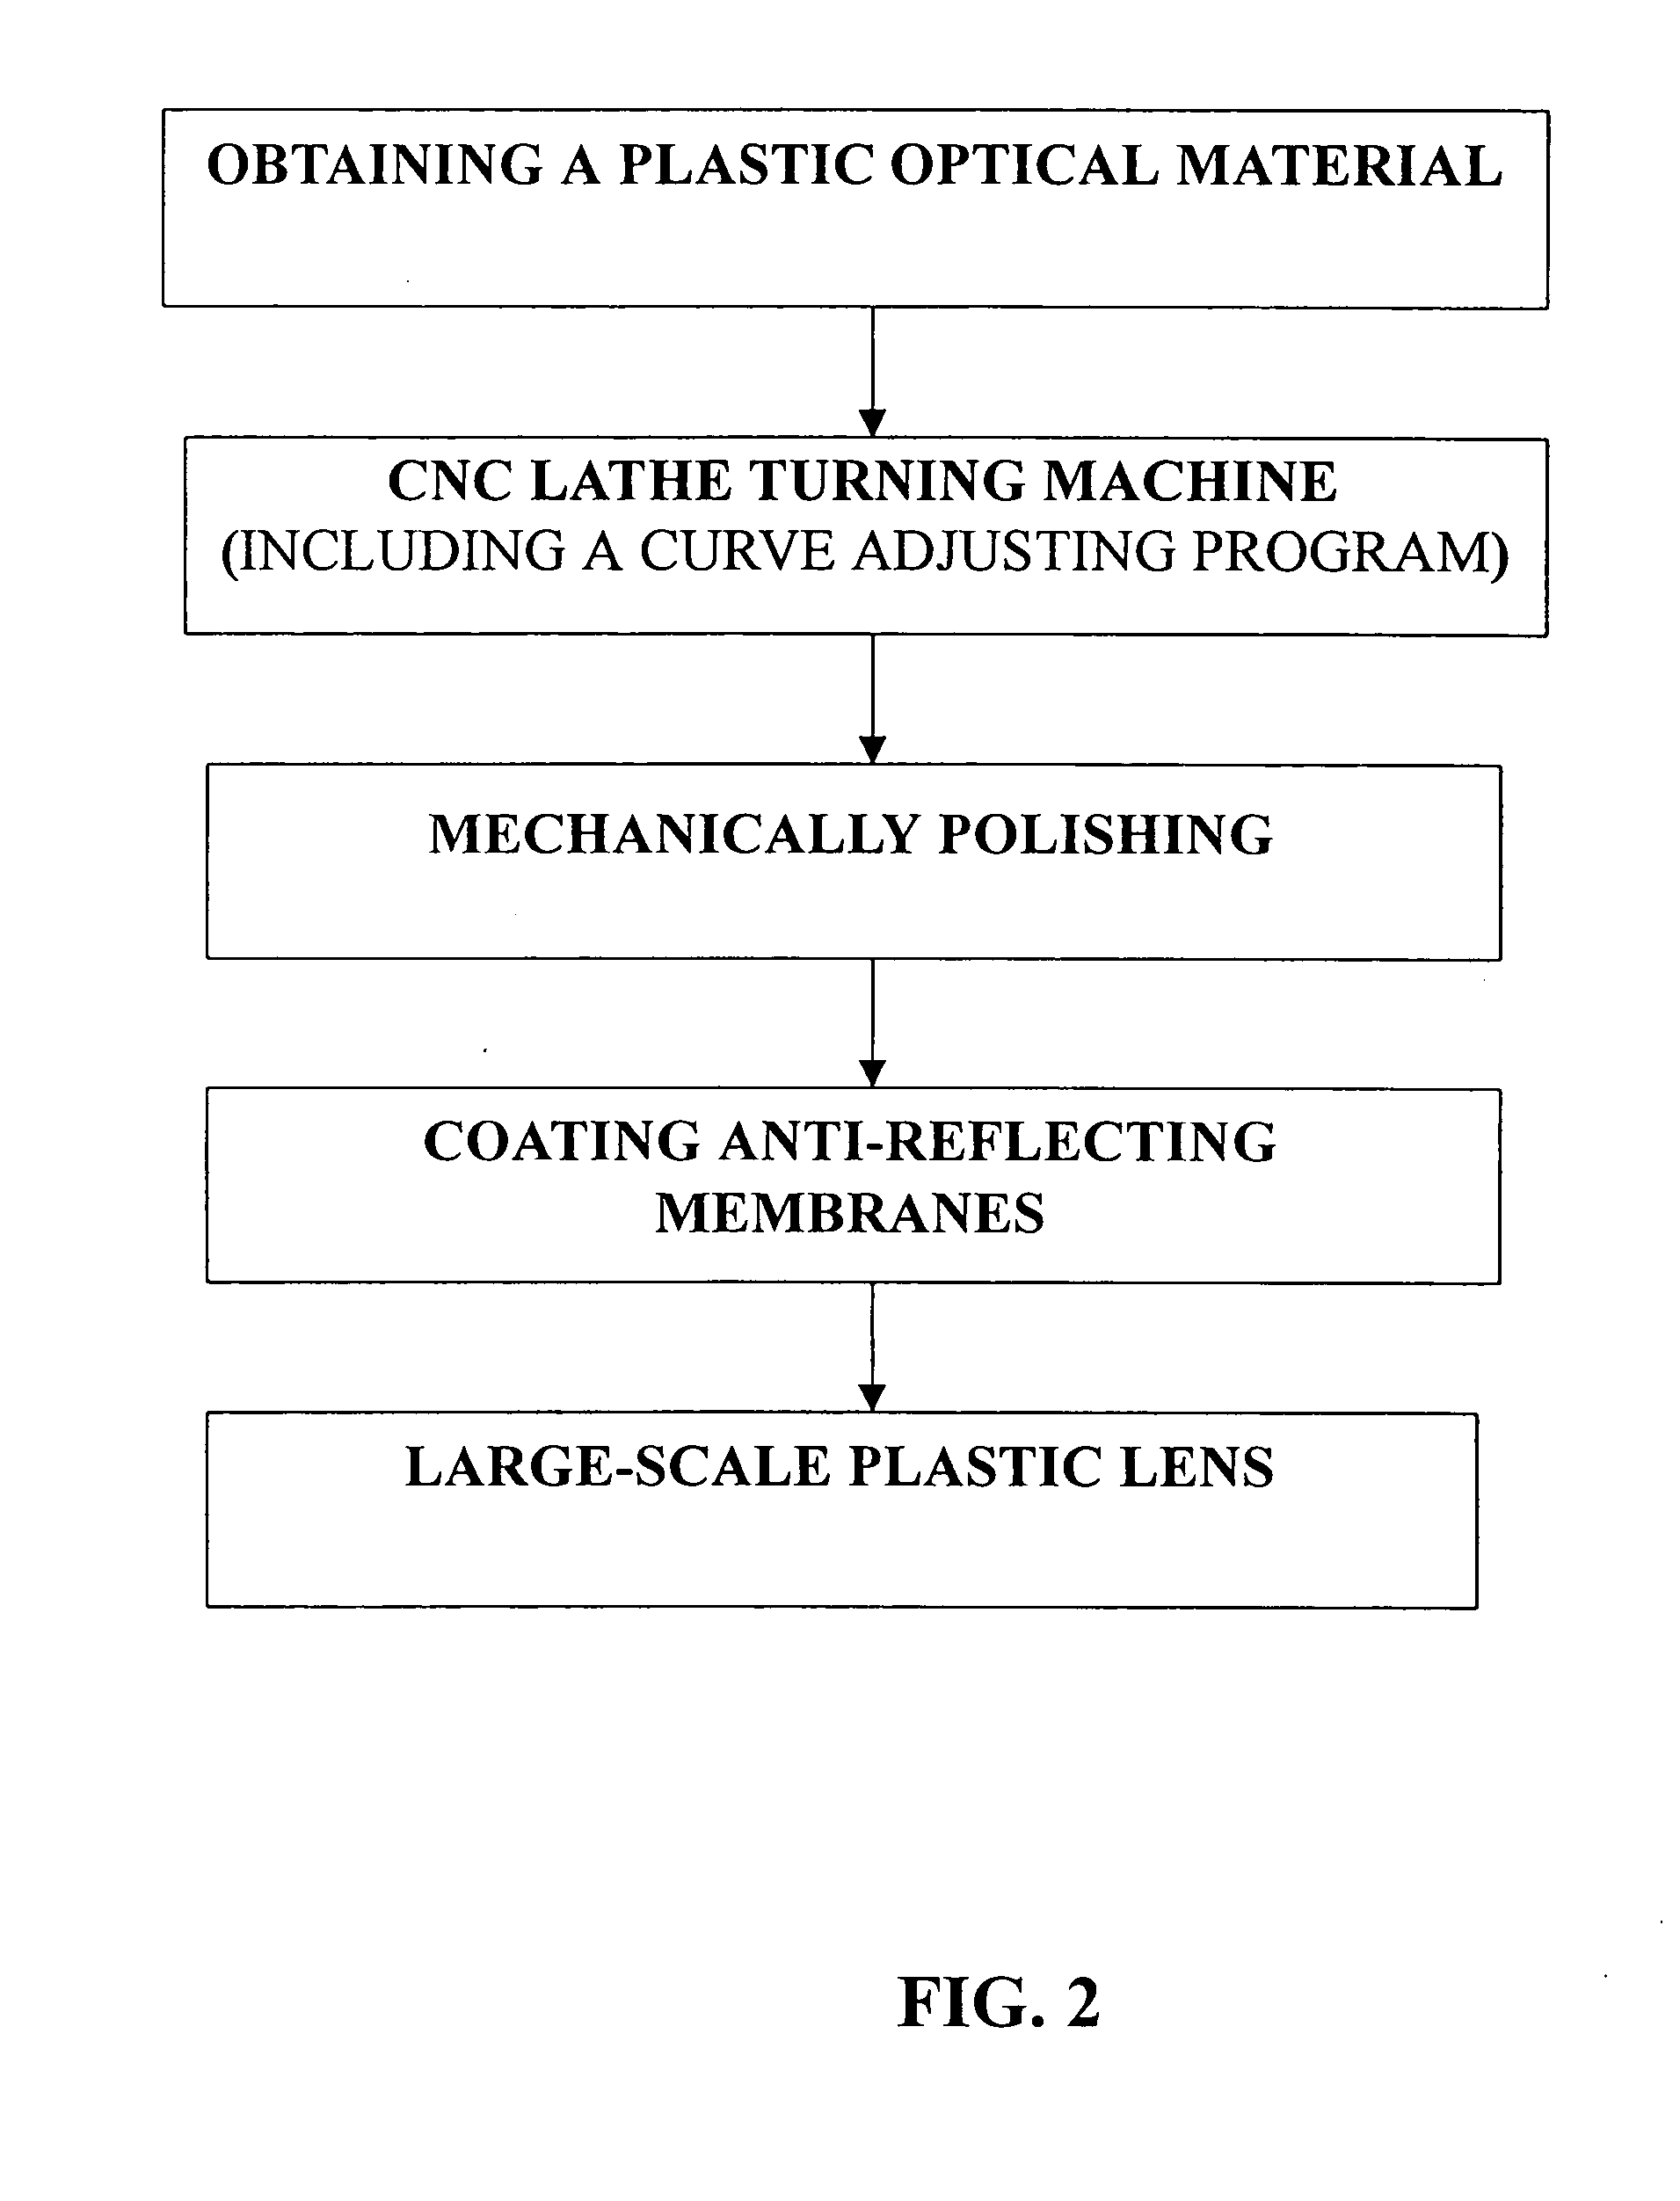 Methods for manufacturing large-scale plastic lenses